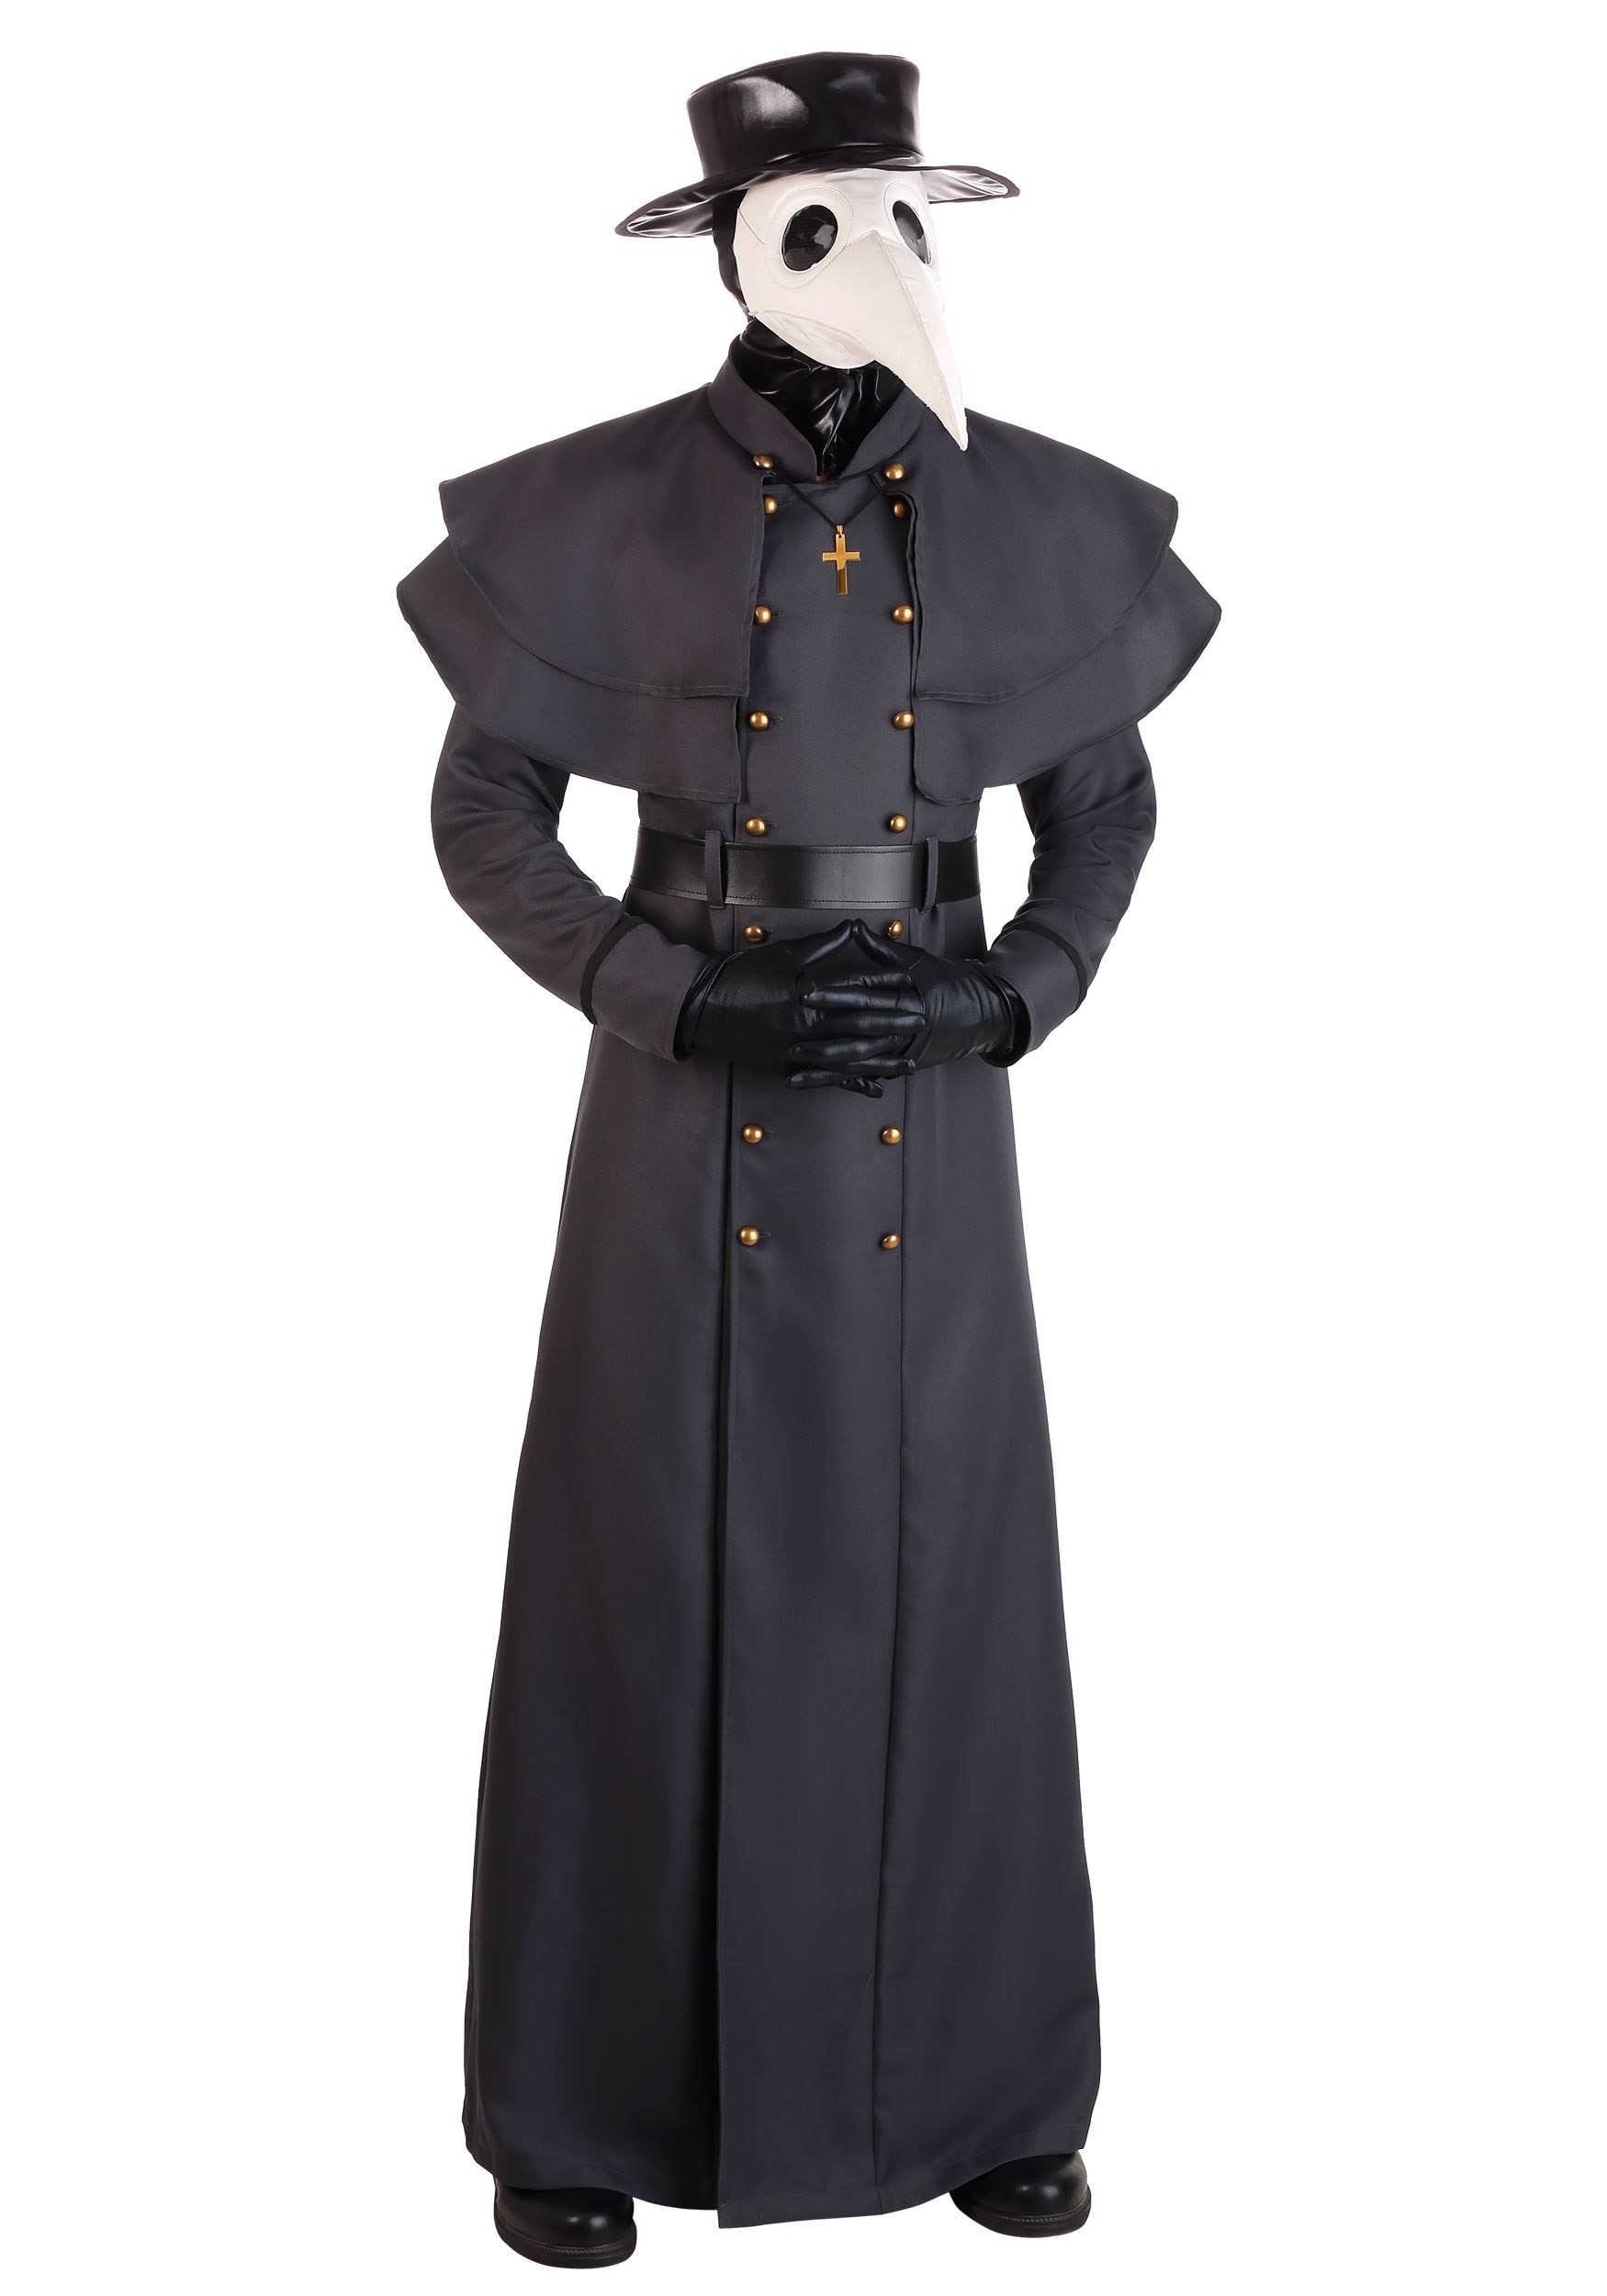 Photos - Fancy Dress Classic FUN Costumes  Plague Doctor Costume for Adults | Scary Adult Costum 